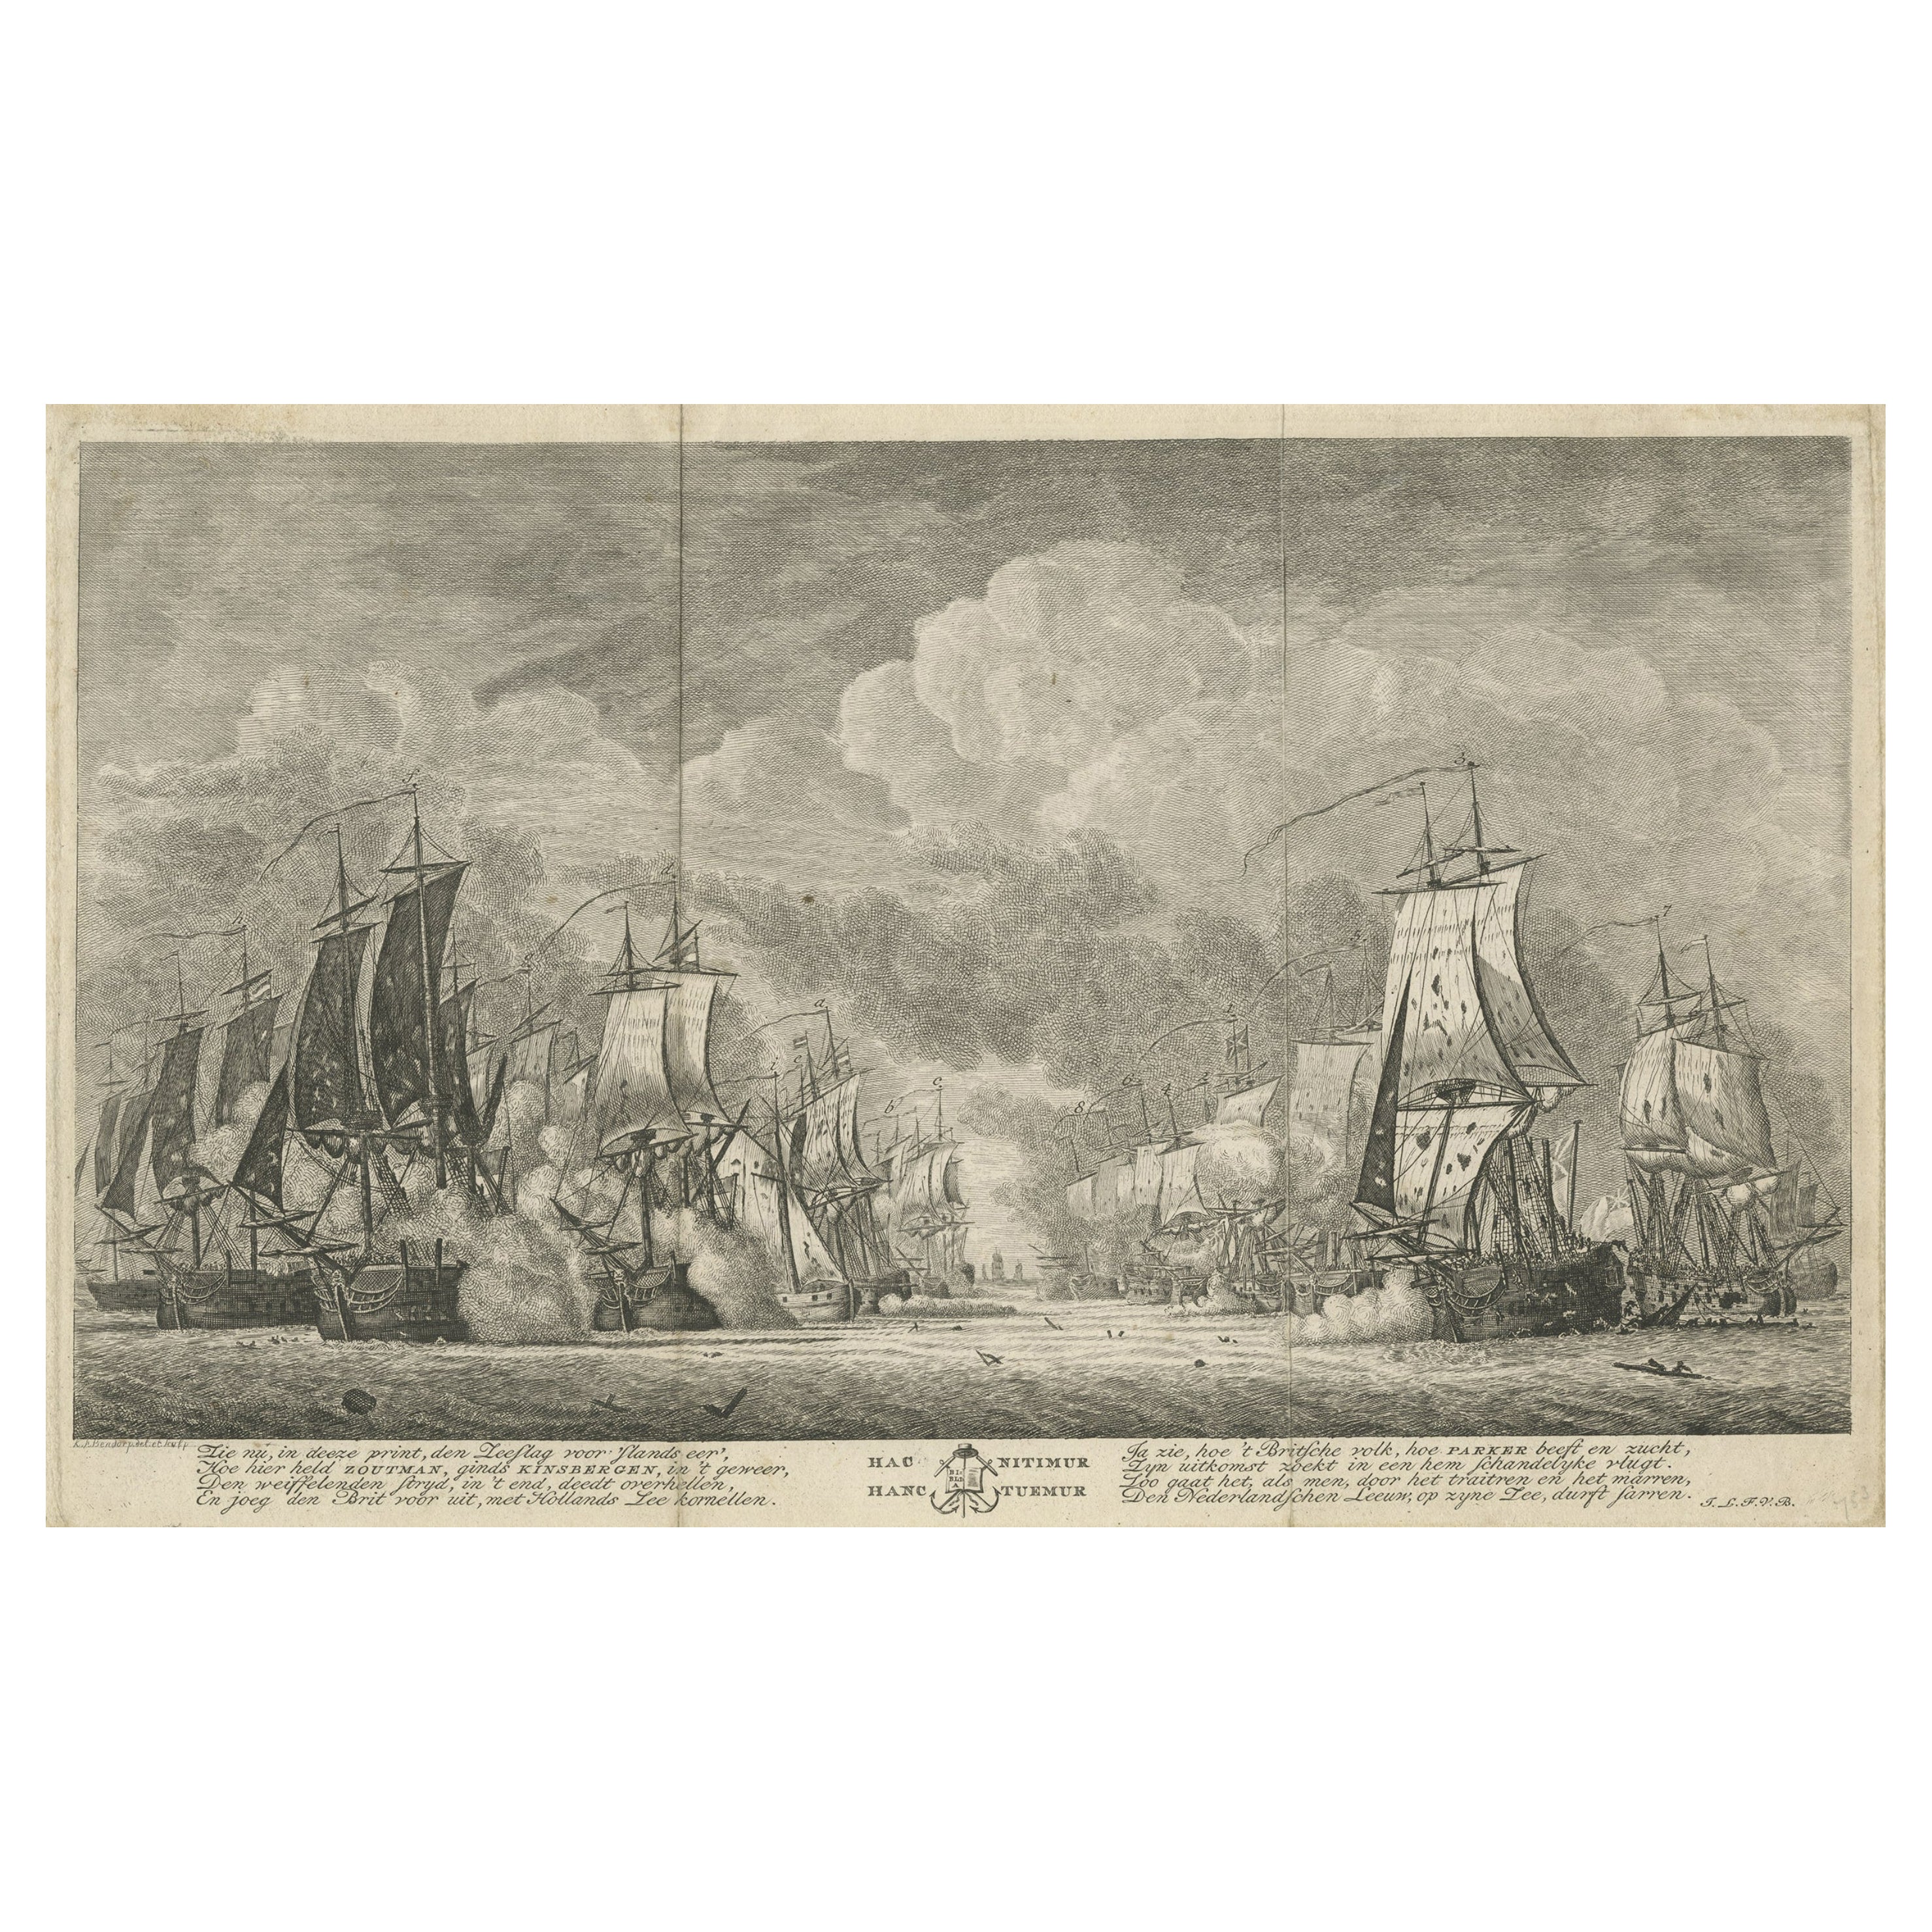 Old Print of the Battle of Dogger Bank During the Fourth Anglo-Dutch War, 1781